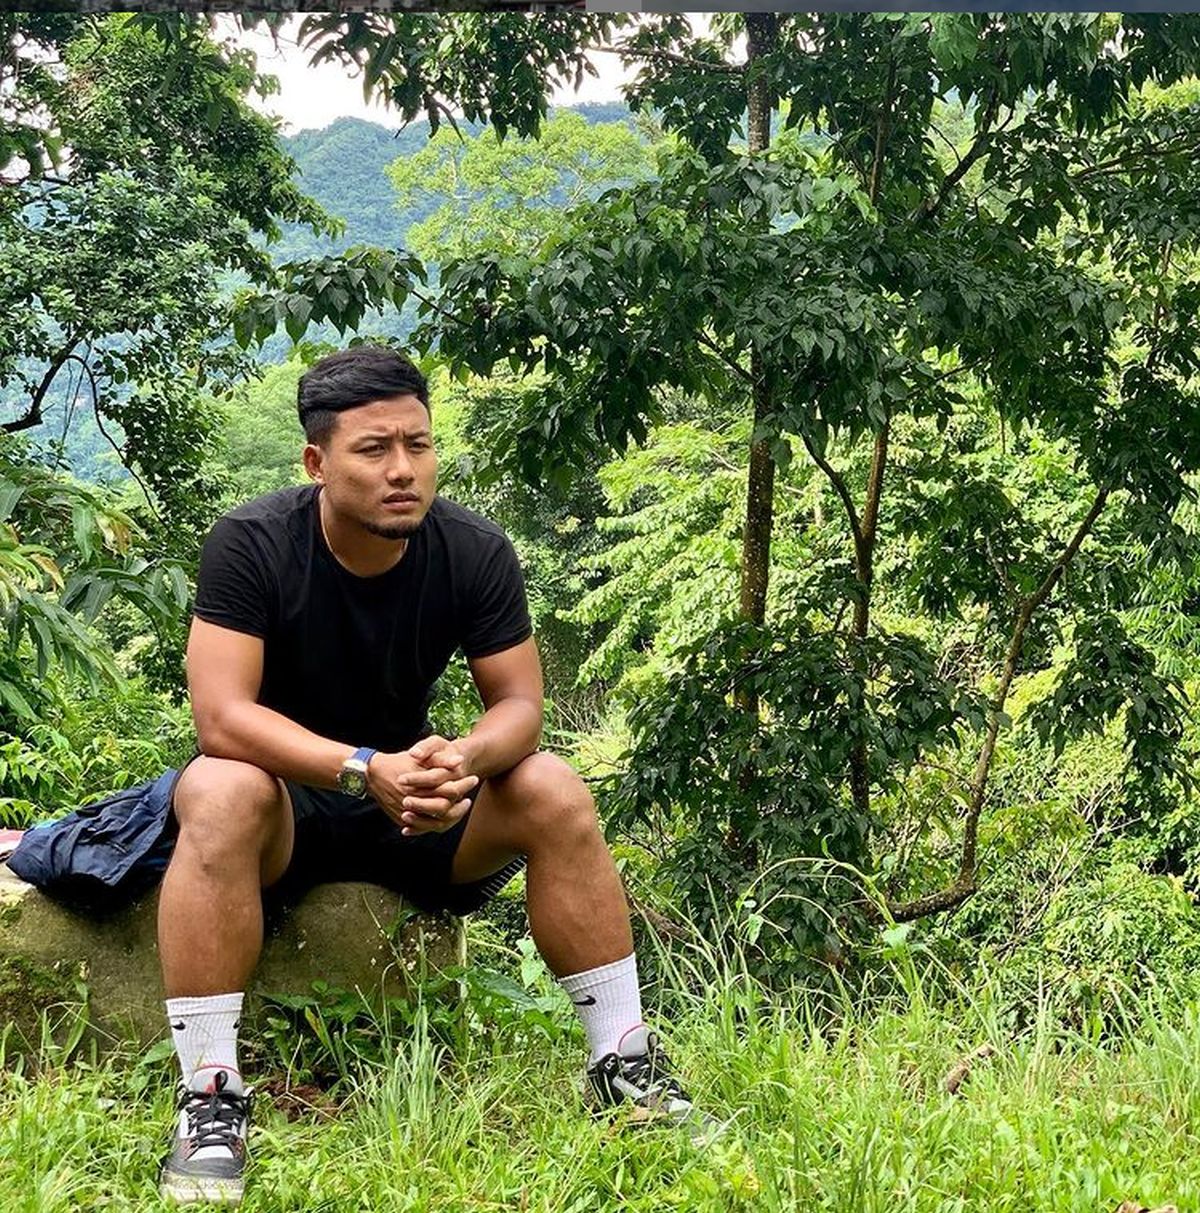 India footballer Jeje Lalpekhlua along with a number of youth from his village -- Model Veng Hnahthial -- formed a group that works day and night to help preserve the ecosystem of the river that flows close to their homes.